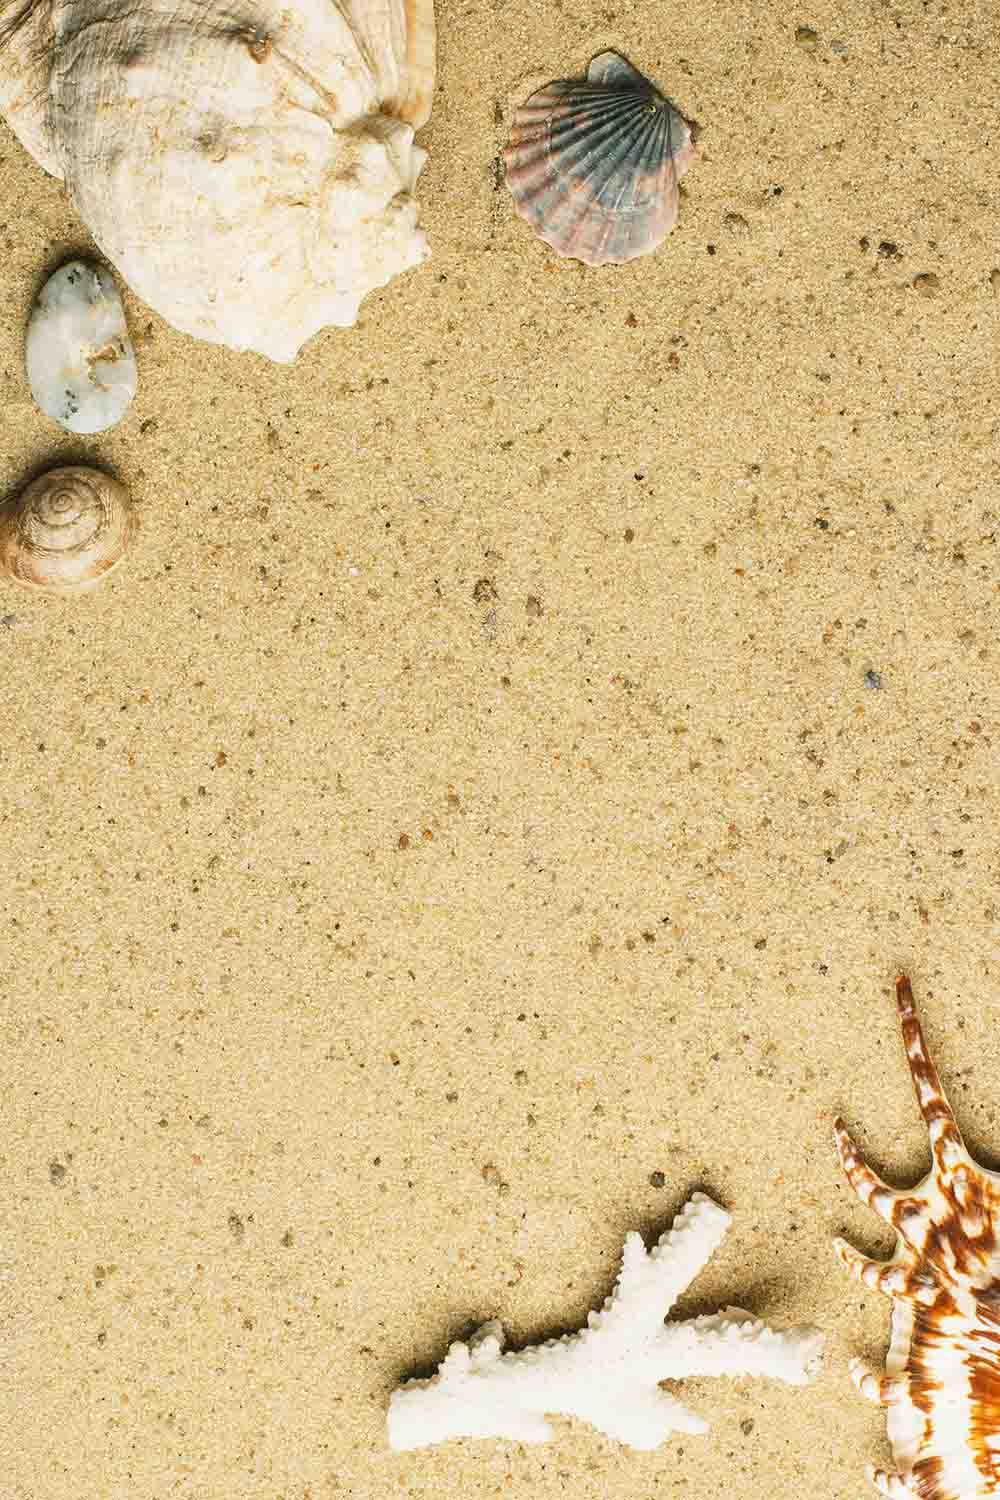 Shell And Stone On Beach For Summer Photo Backdrop Shopbackdrop